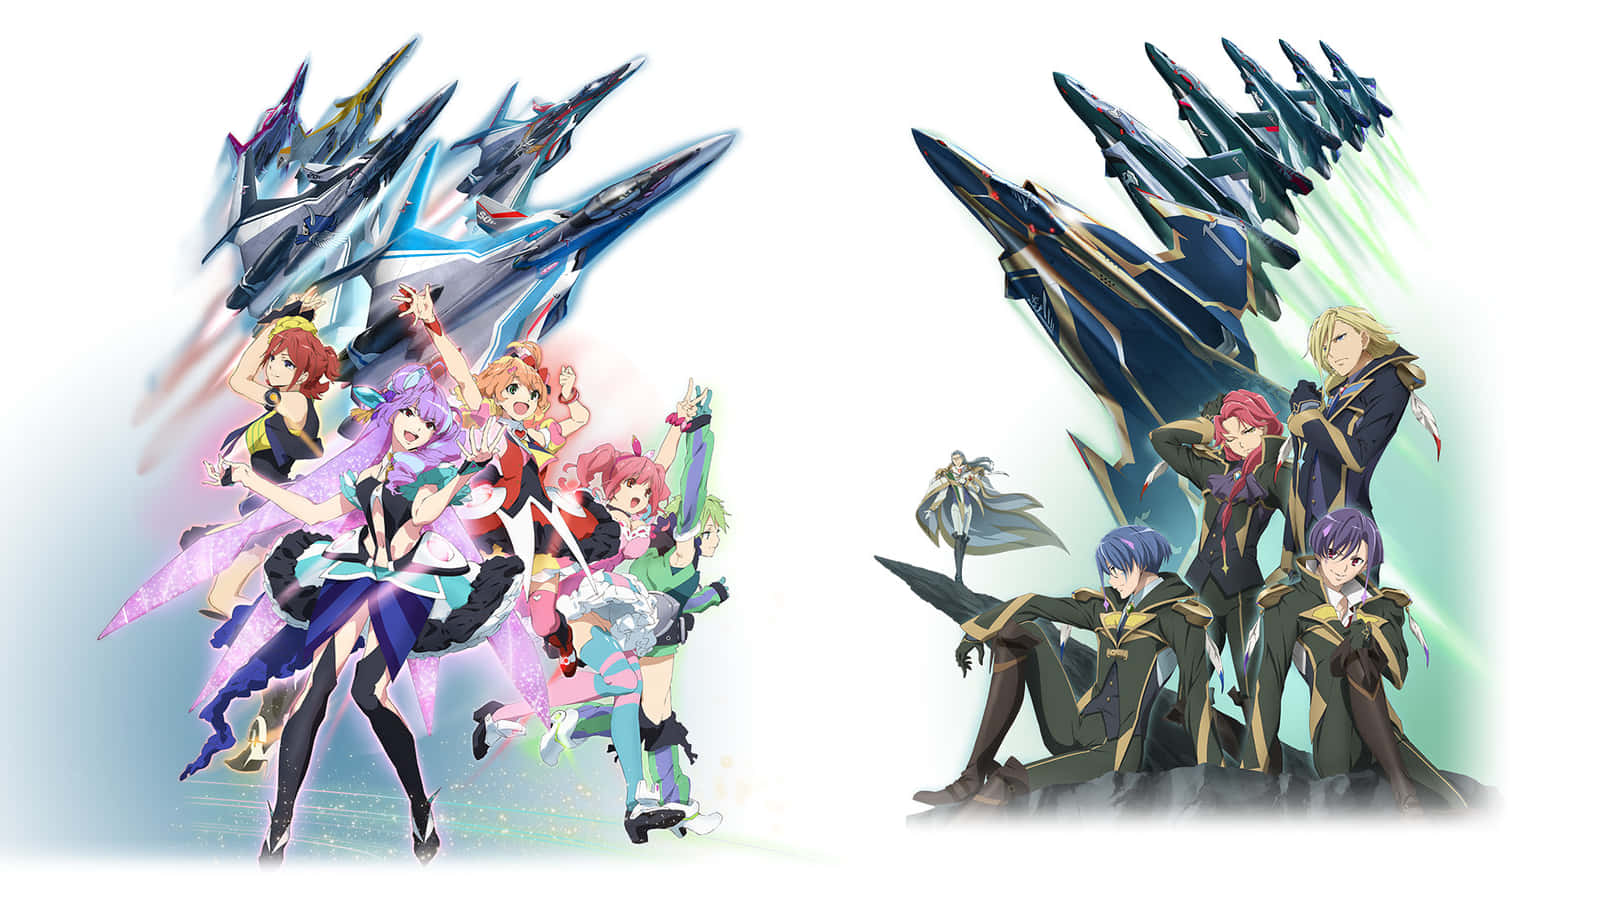 A thrilling display of power in the world of Macross Delta Wallpaper